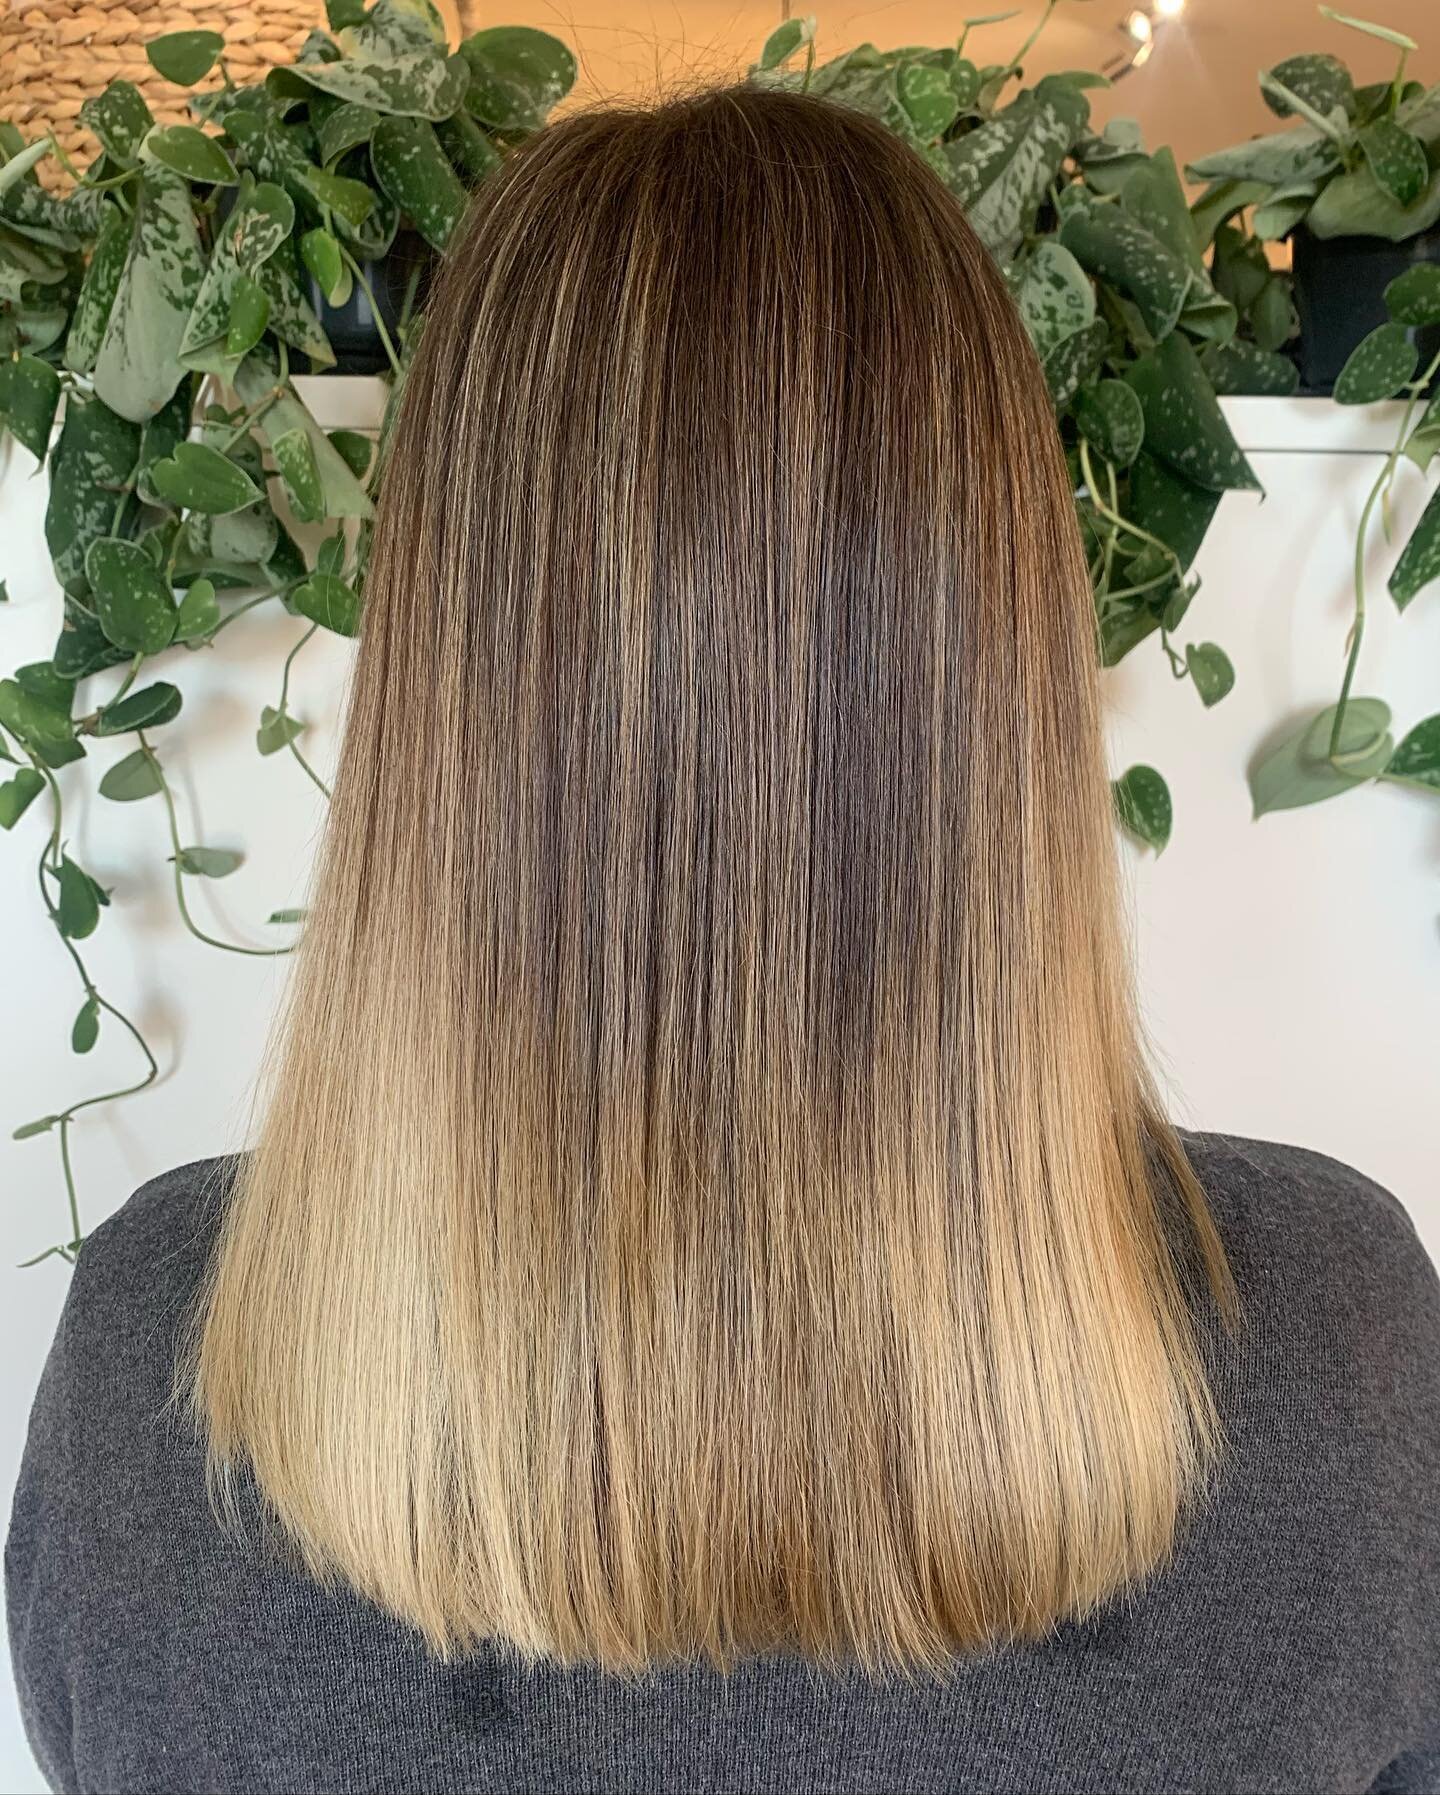 Blend blend blend! Used different techniques to get rid of harsh lines and creat a more seamless blend ✨
.
.
.
.
.

Brunette - #brunettebalayage #brunettehair #brondehair #brondebalayage #bronde #bestofbalayage #balayageartists #balayagedandpainted #